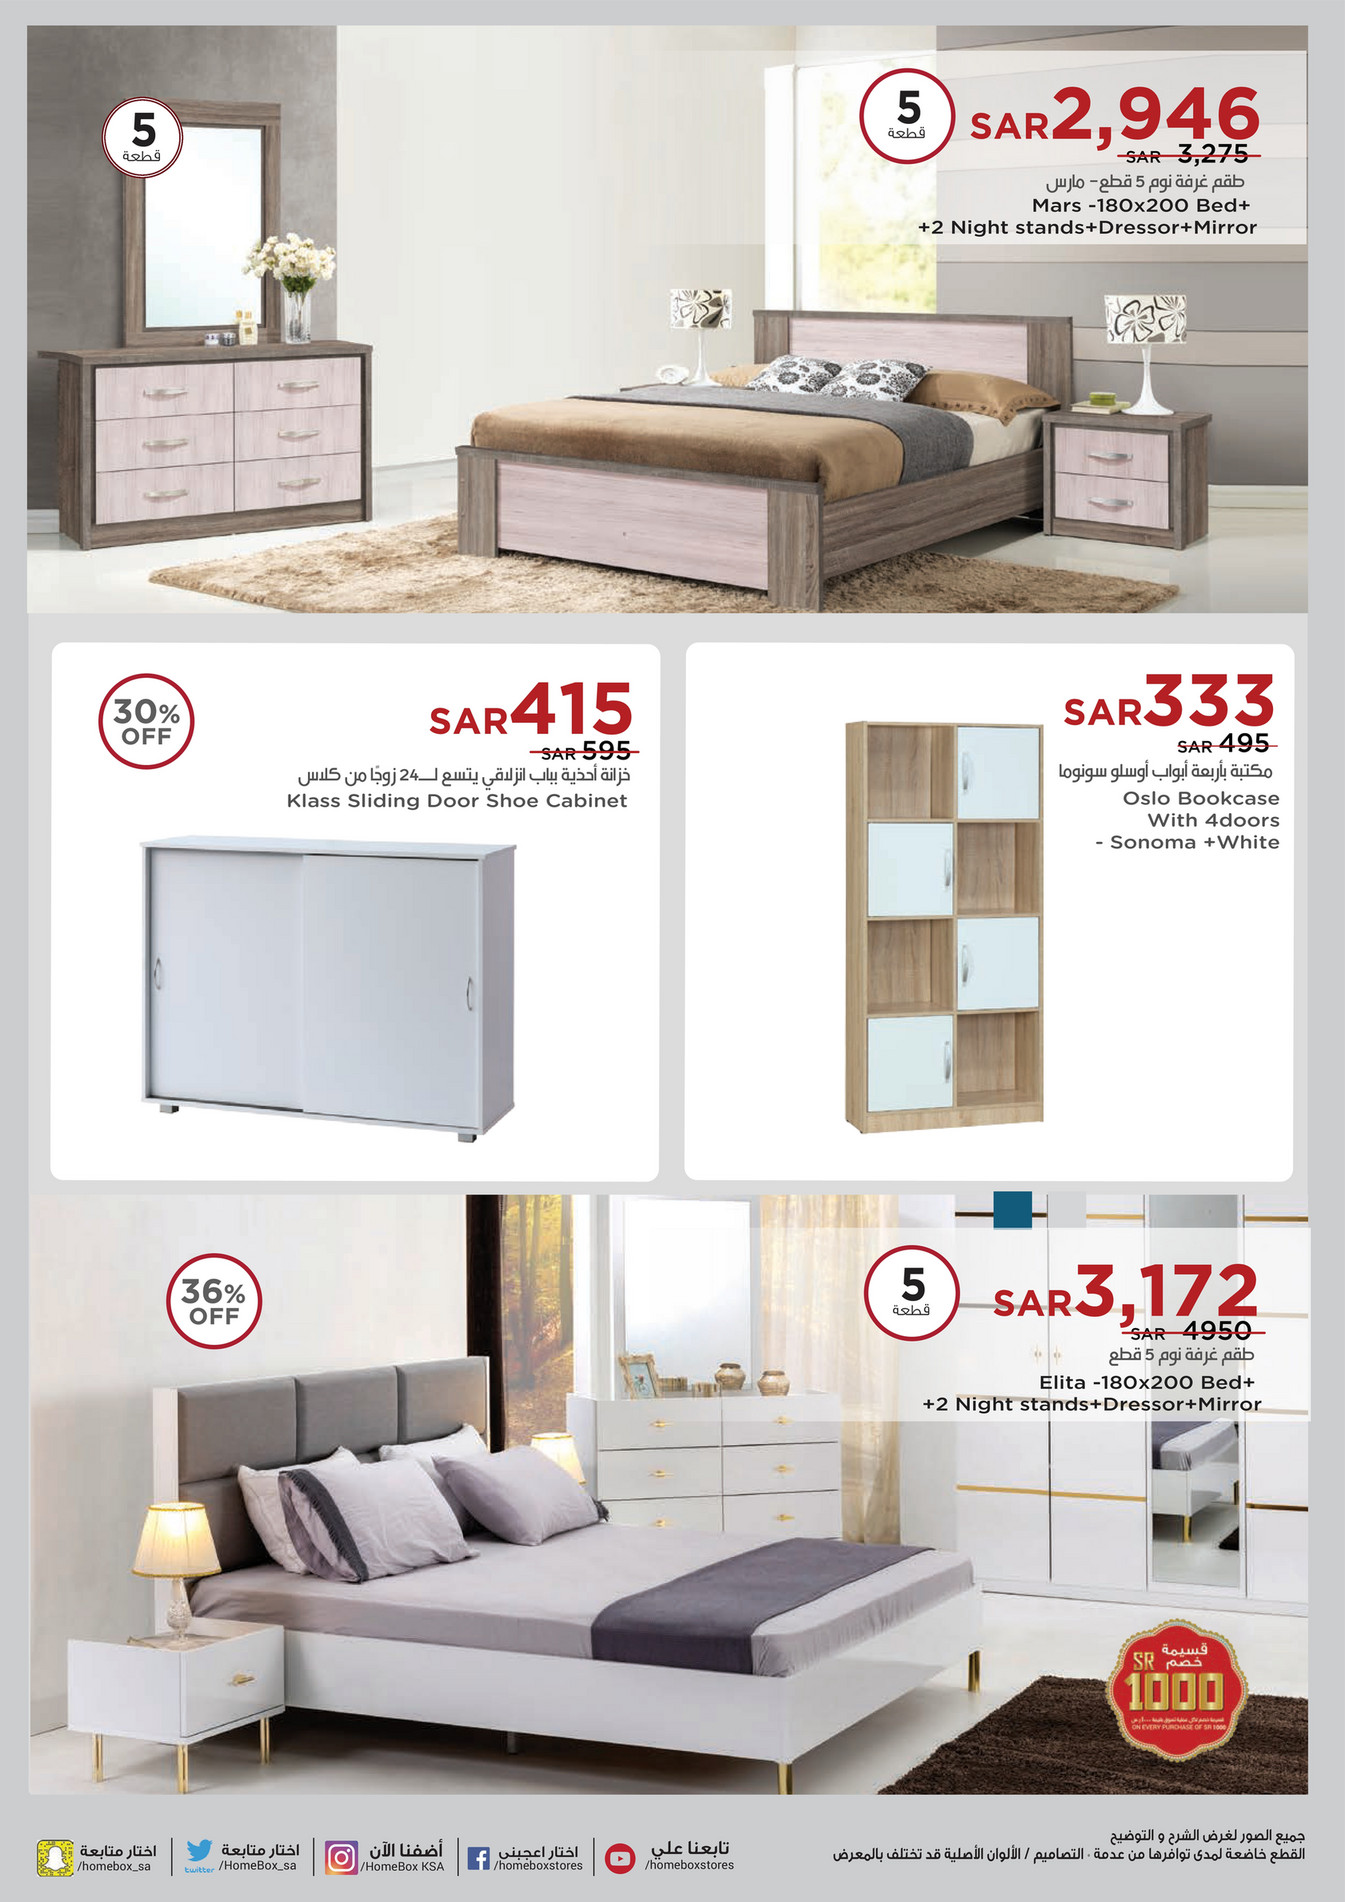 Landmark Group Home Box Sale October 2020 Page 12 13